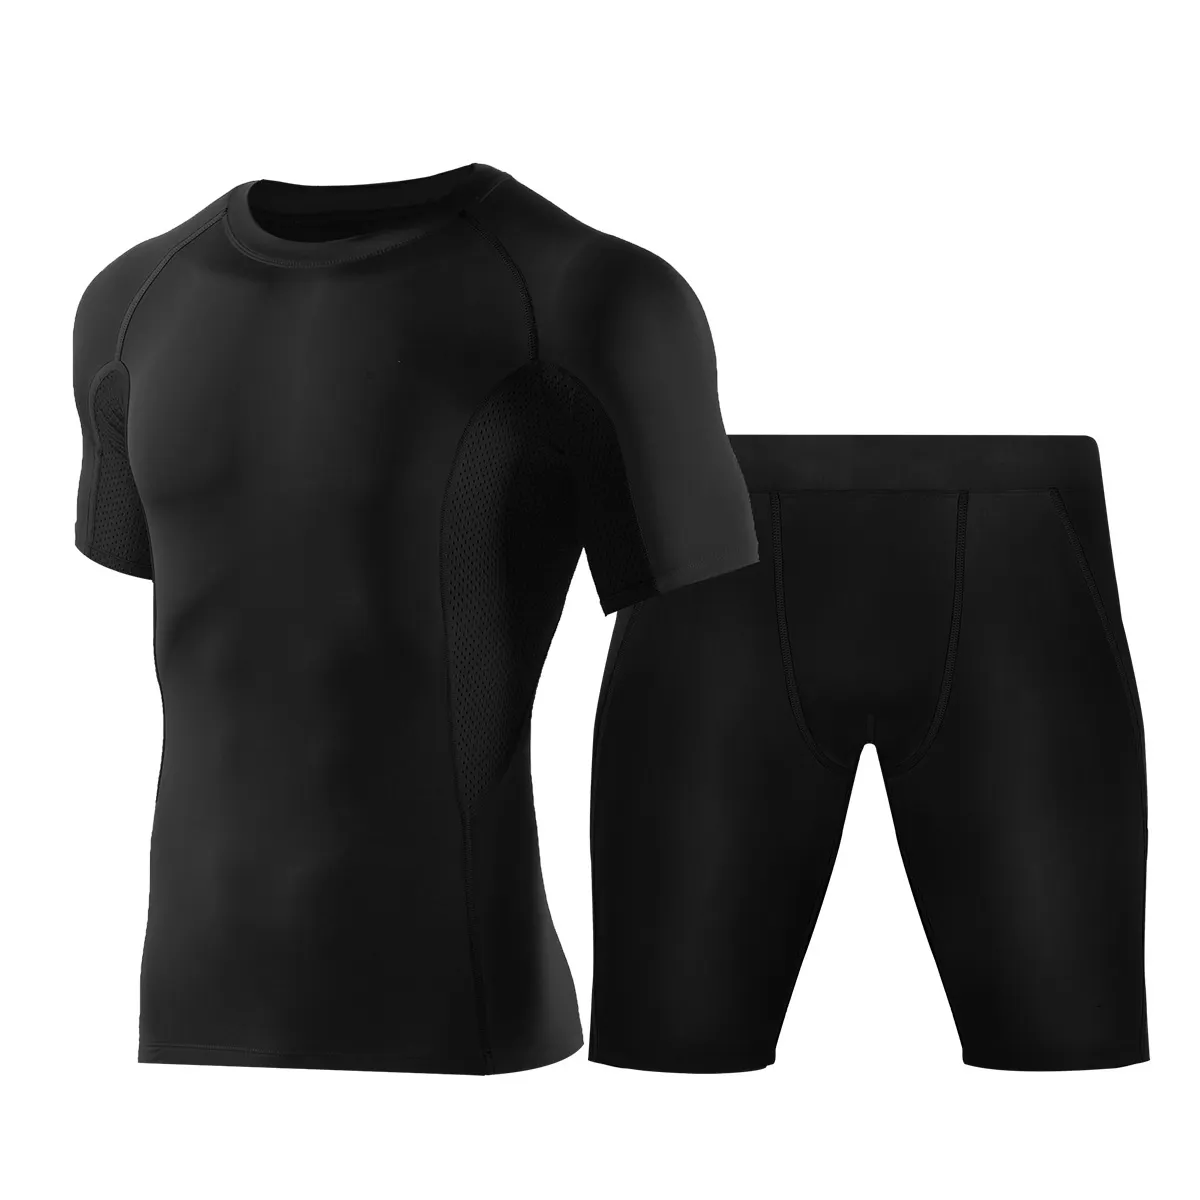 Fitness Clothing Men's Quick Dry Suit Stretch Sports Men's Tights Sportswear Bodysuit Fitness Clothes Gym T-shirt For Men